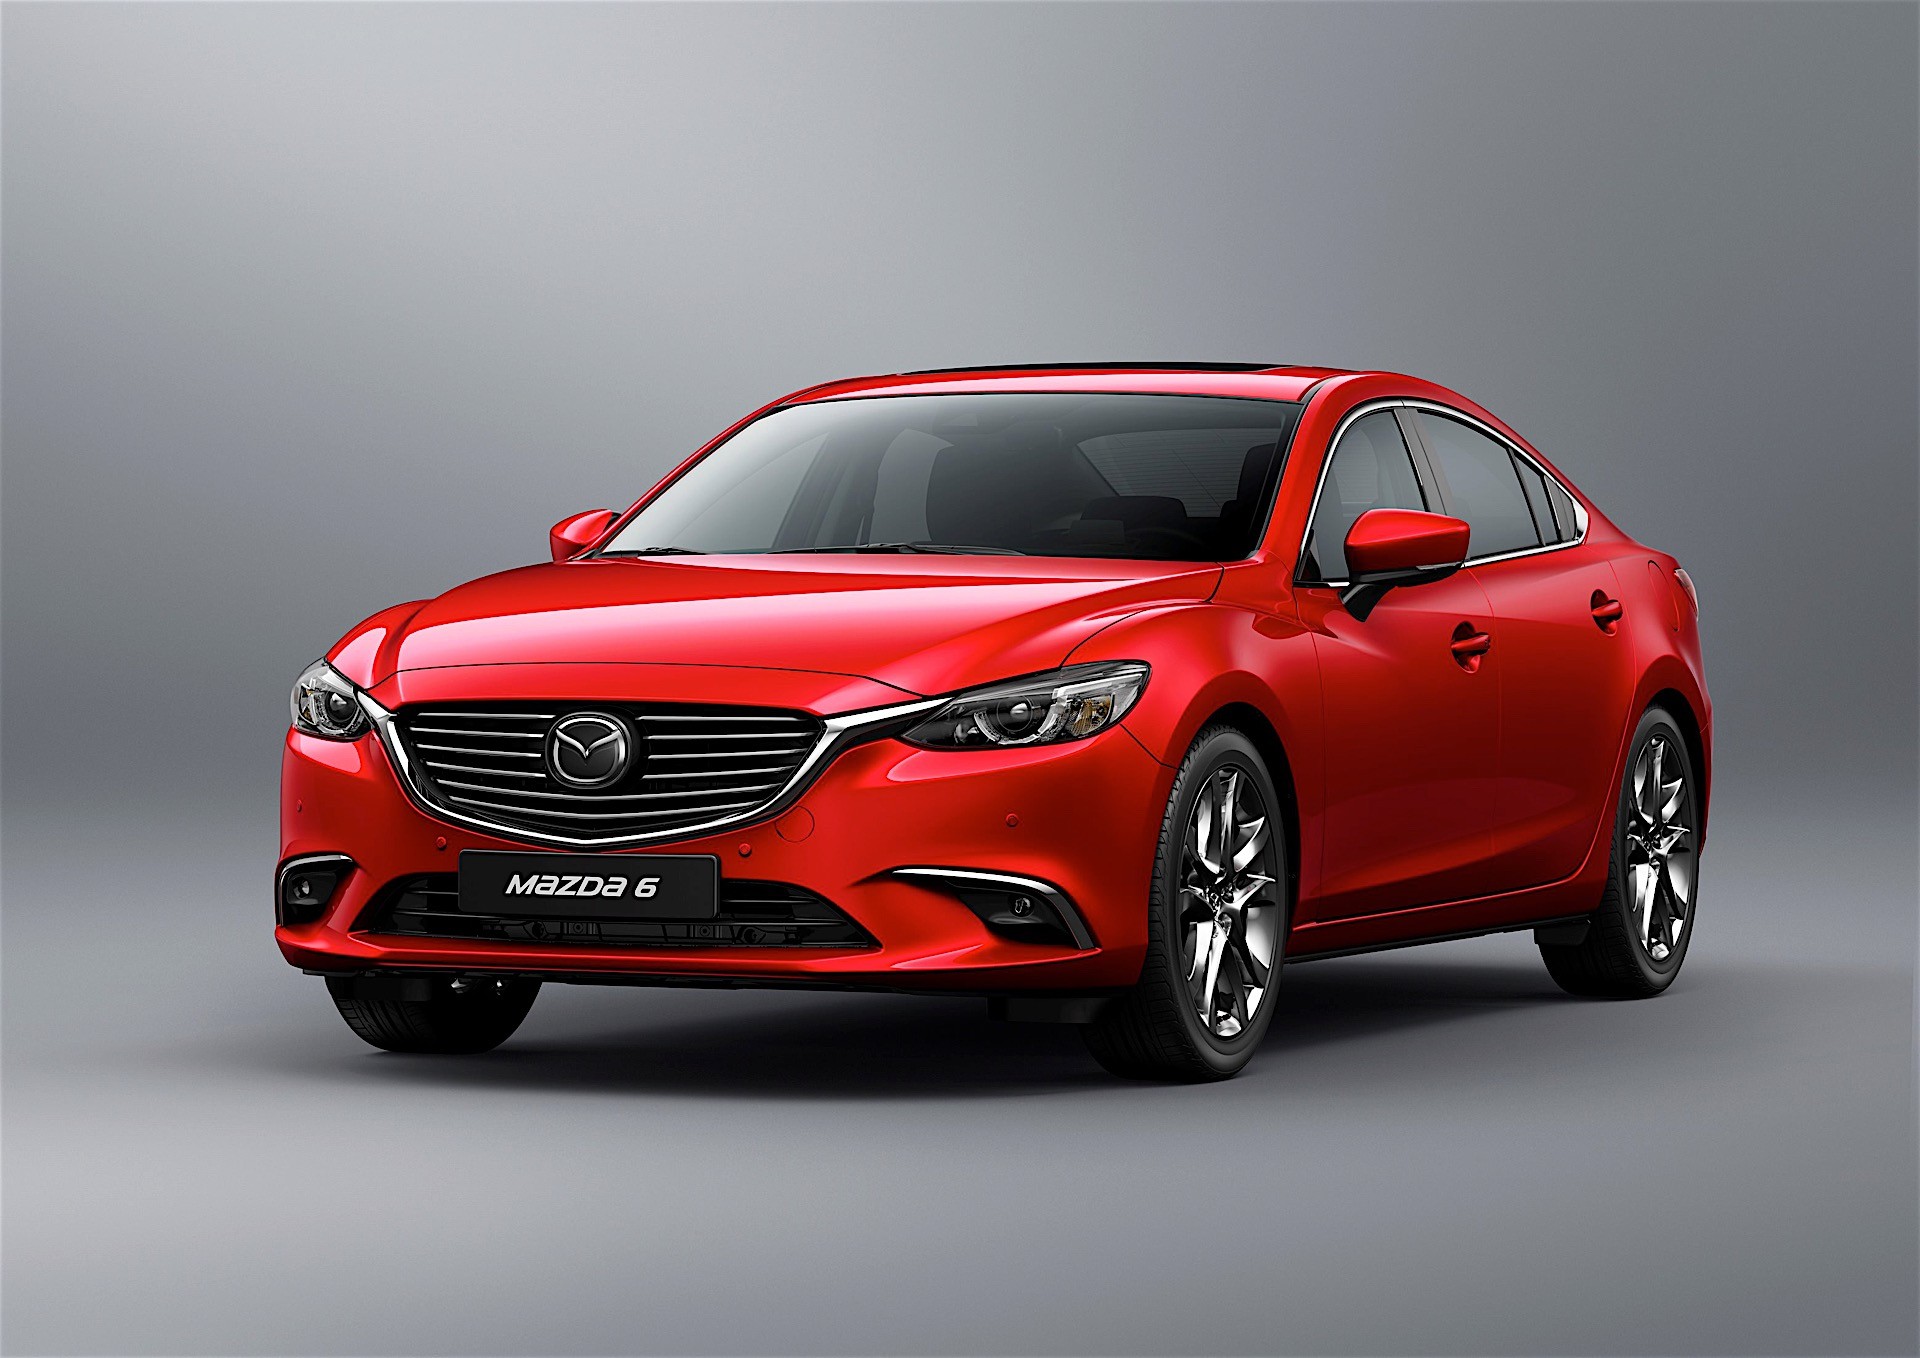 2017 Mazda6 Will Be Launched In Europe This Autumn, Has G